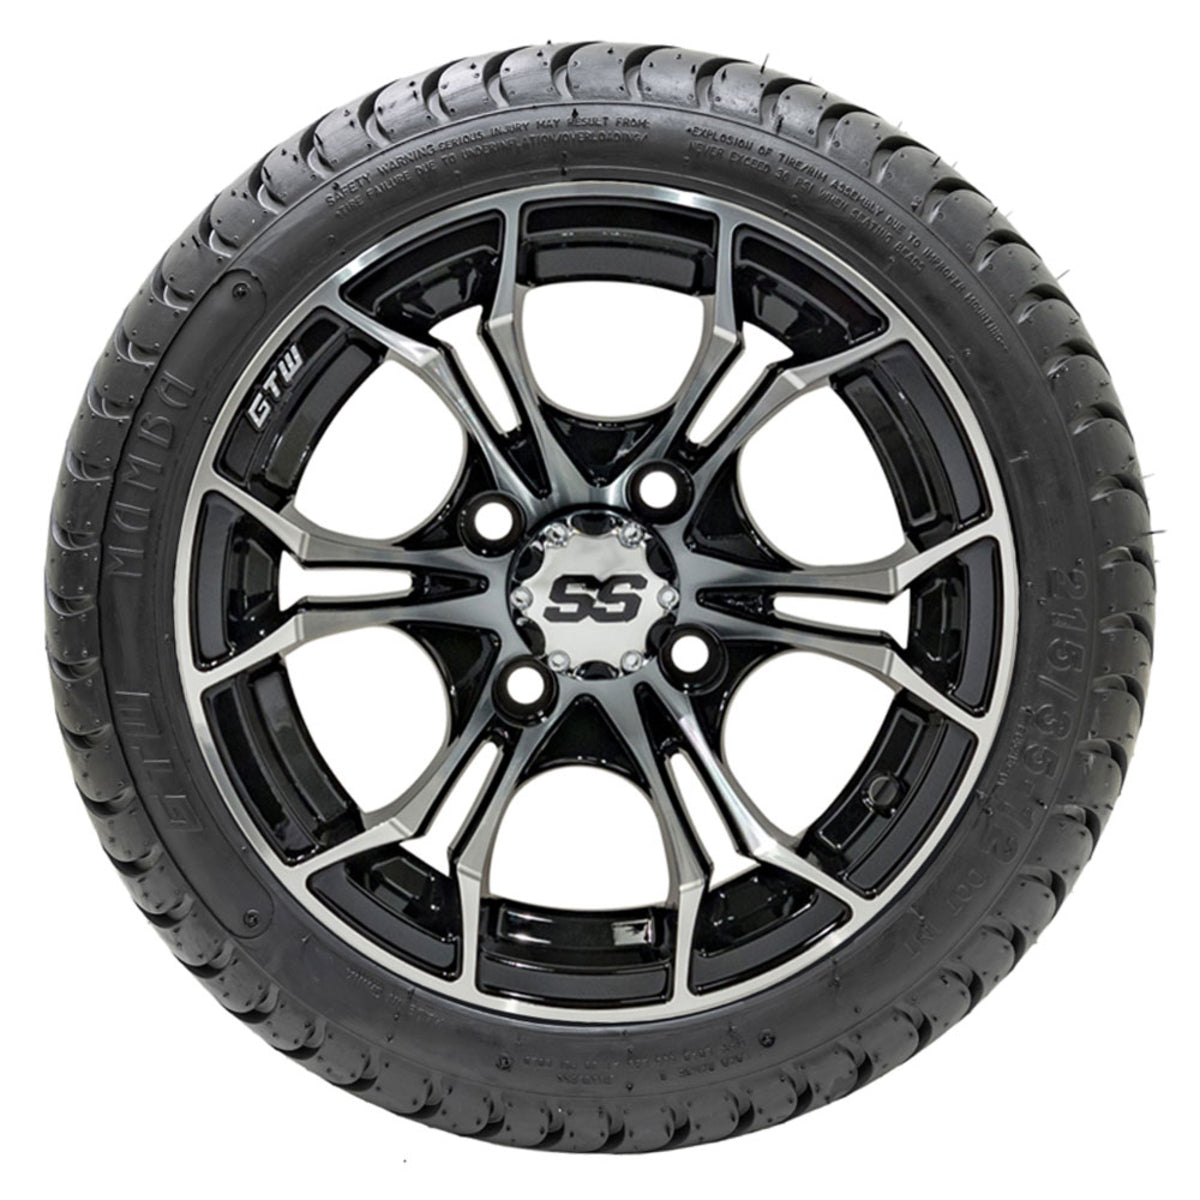 12" GTW Spyder Black and Machined Wheels with 18" DOT Mamba Street Tires "‚Äú Set of 4